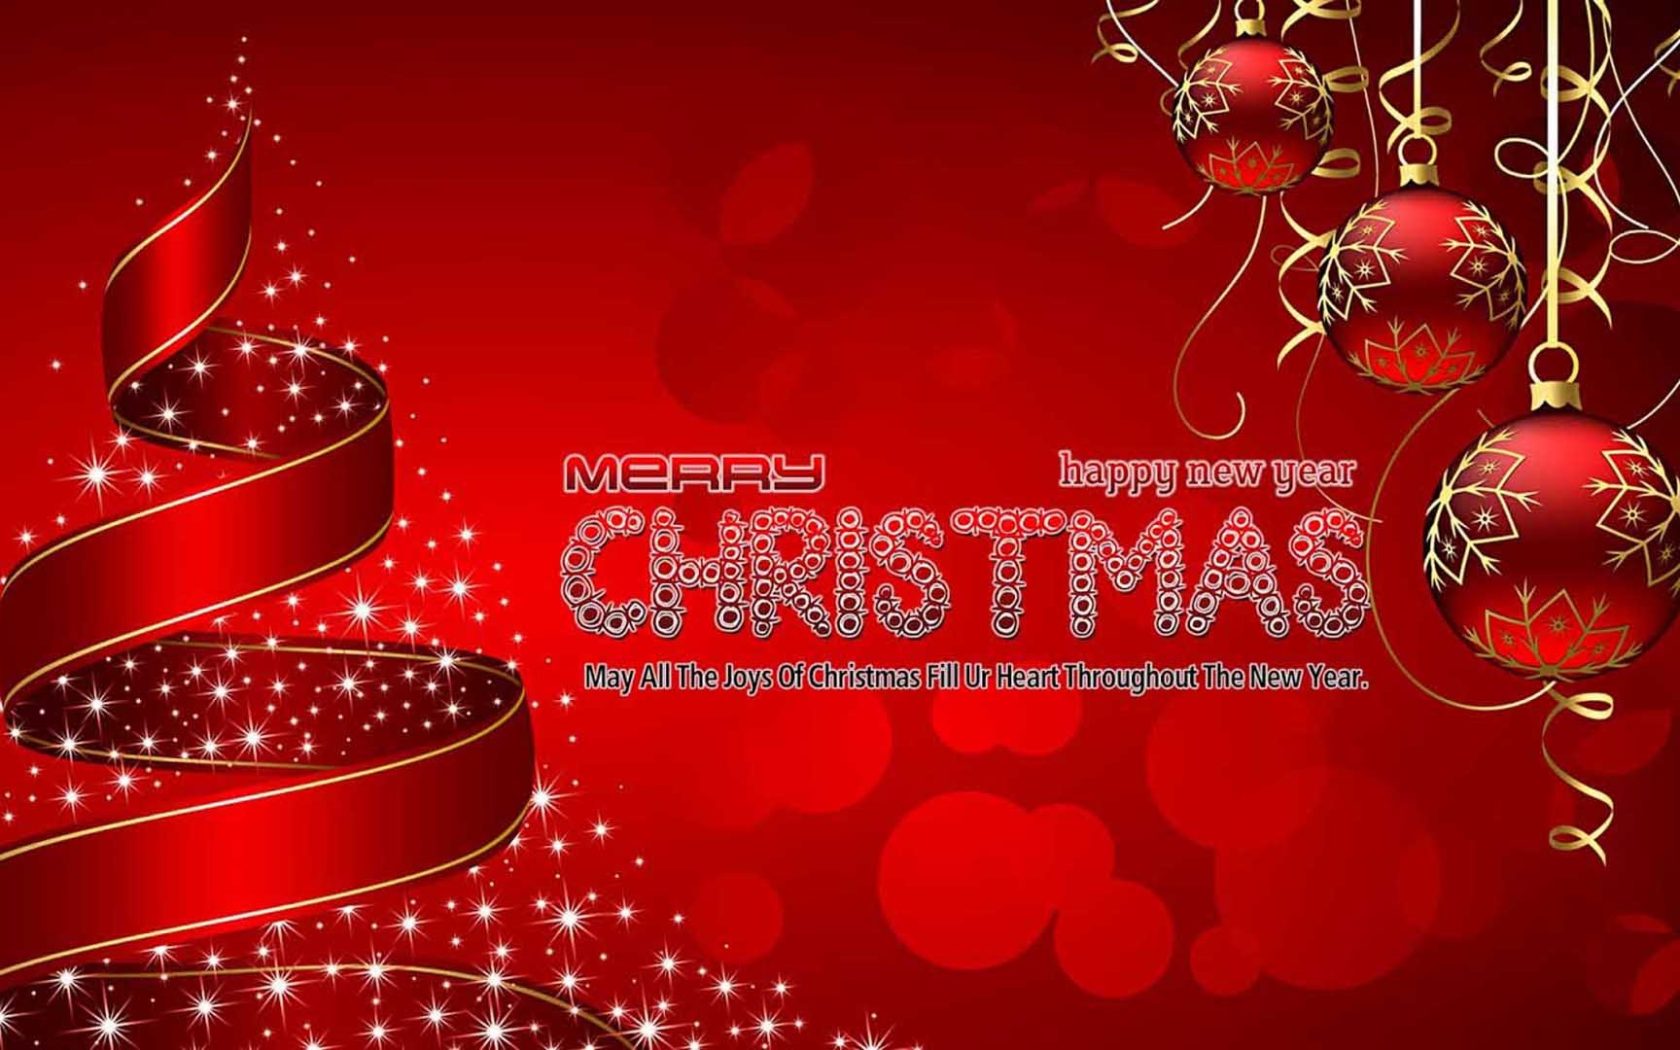 merry christmas wallpapers 2022